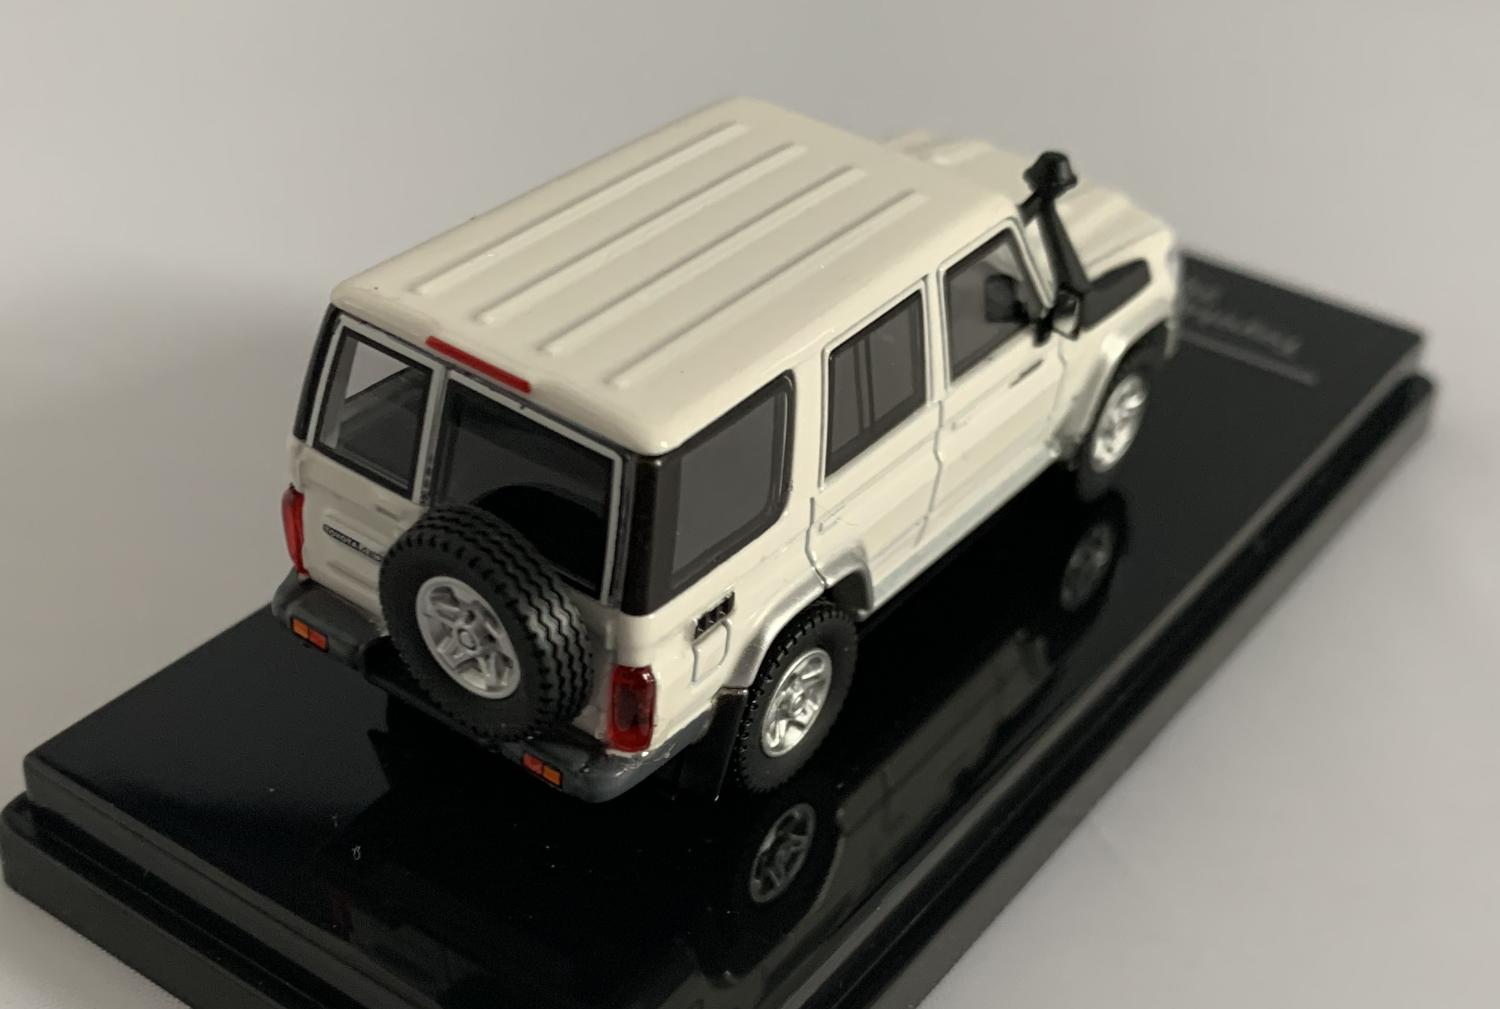 Toyota Land Cruiser in french vanilla 1:64 scale model from Paragon Models